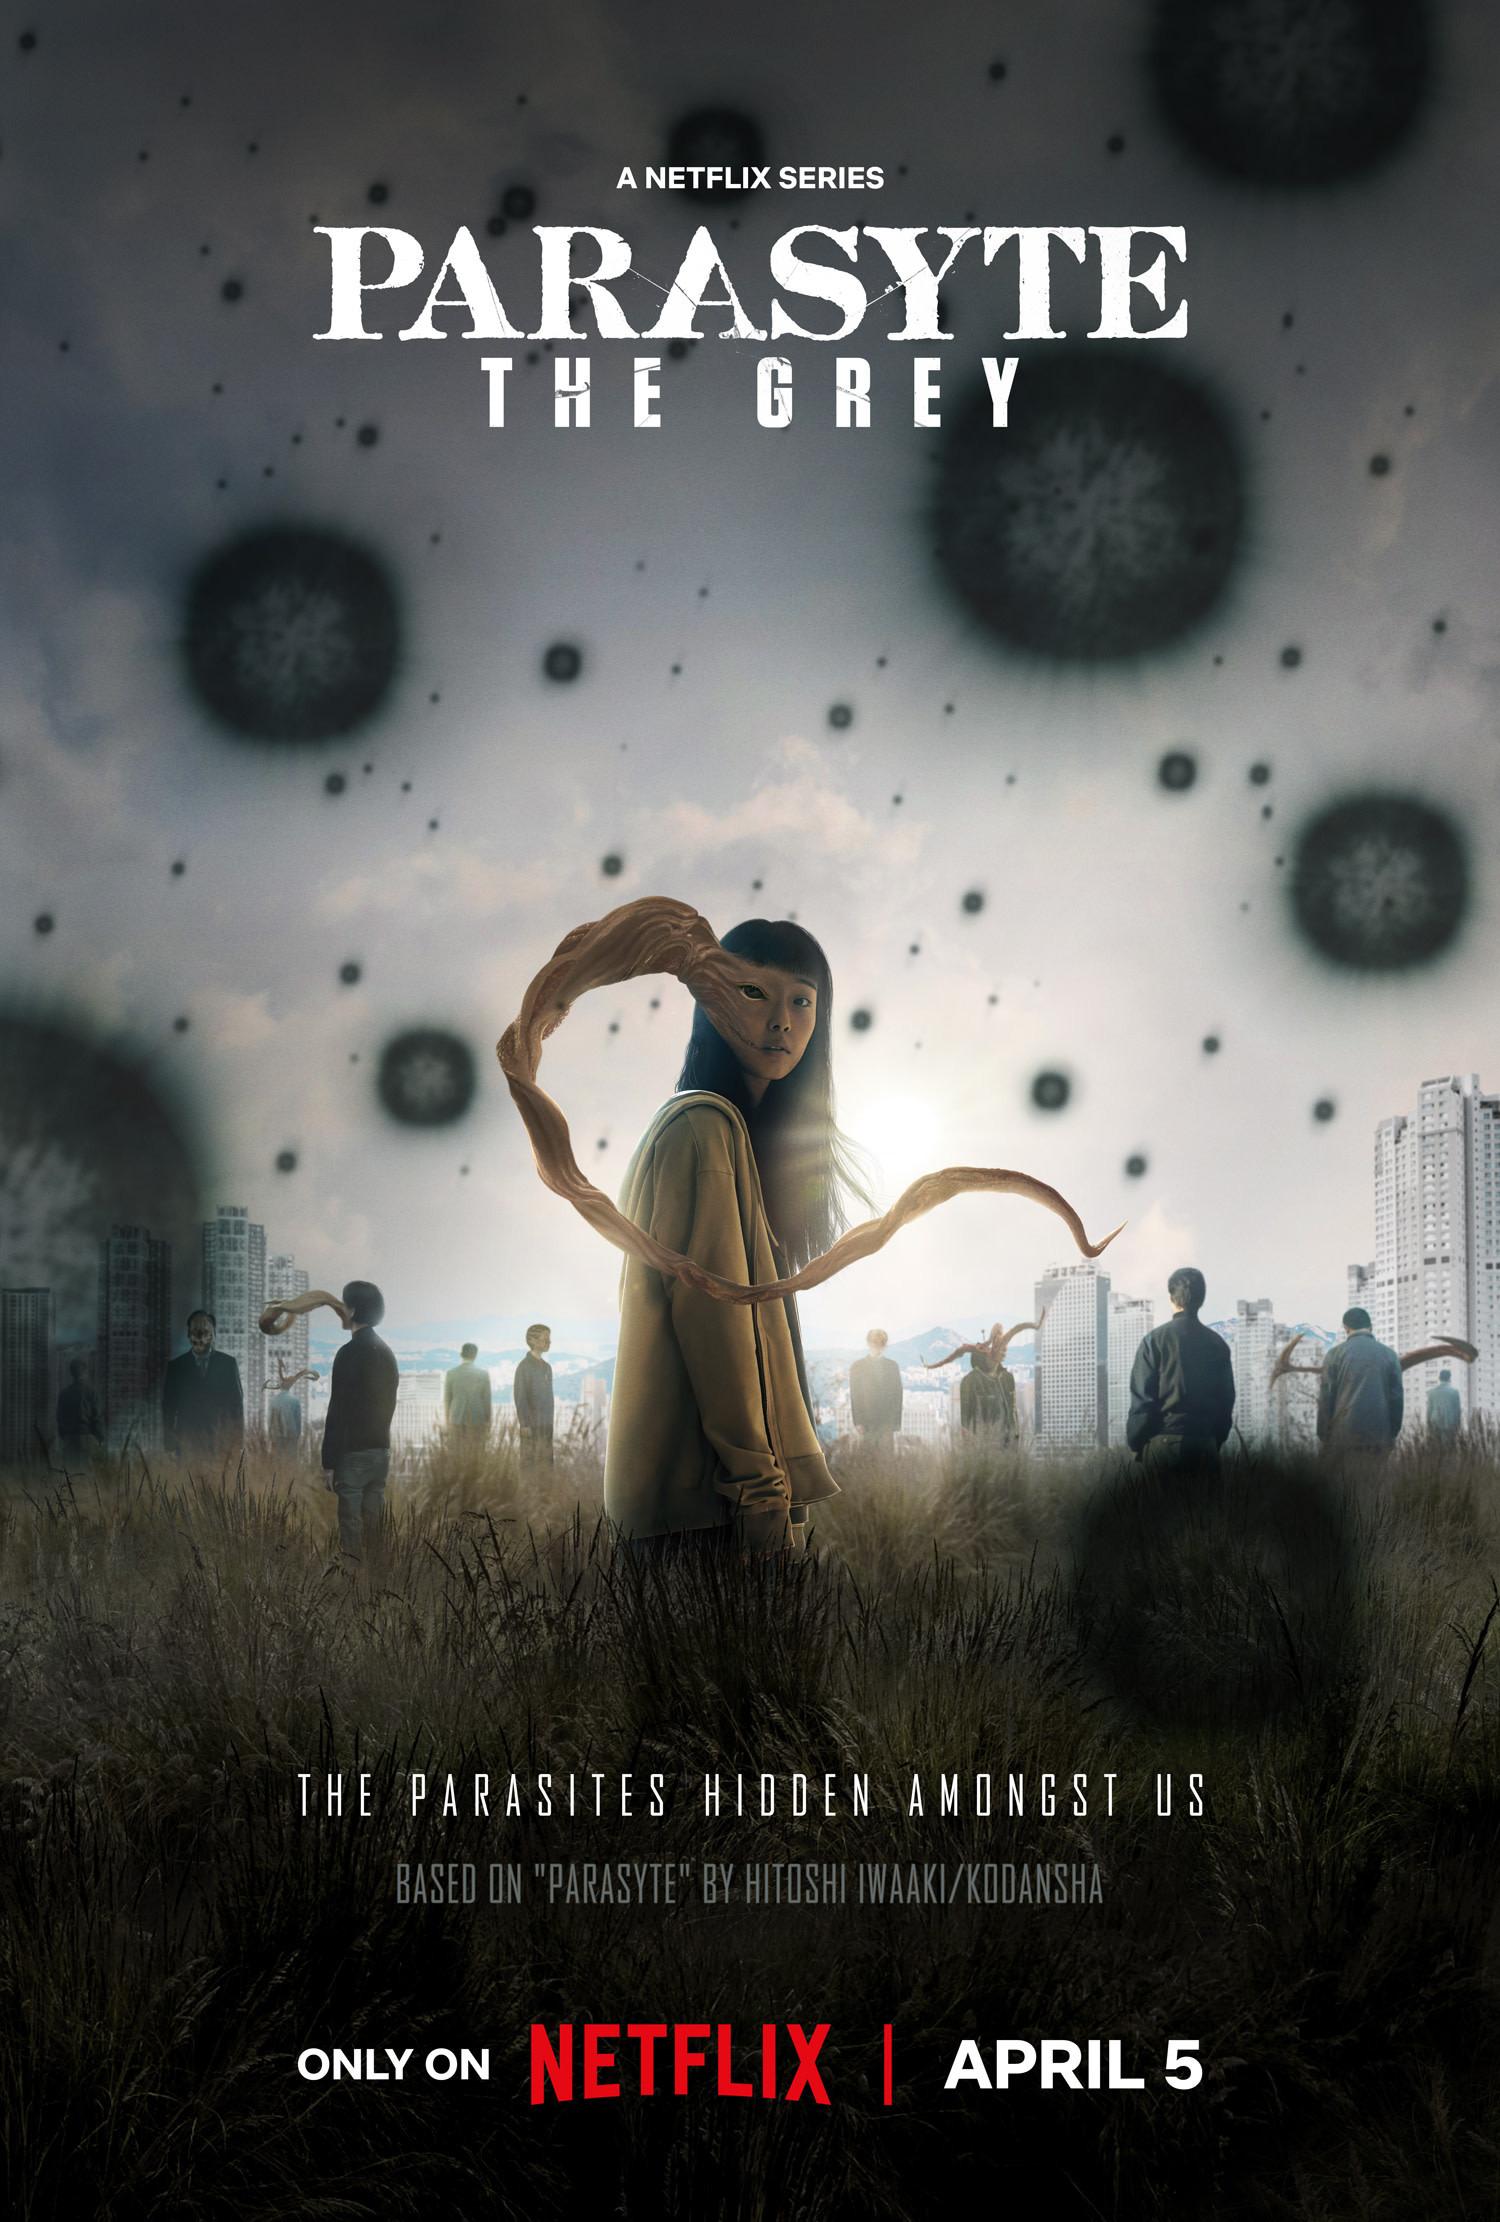 Parasyte The Grey - April 5 (Netflix)Parasyte The Grey ventures into new territories, offering a fresh tale of action, philosophy, and existential dread inspired by Hitoshi Iwaaki's original manga series.